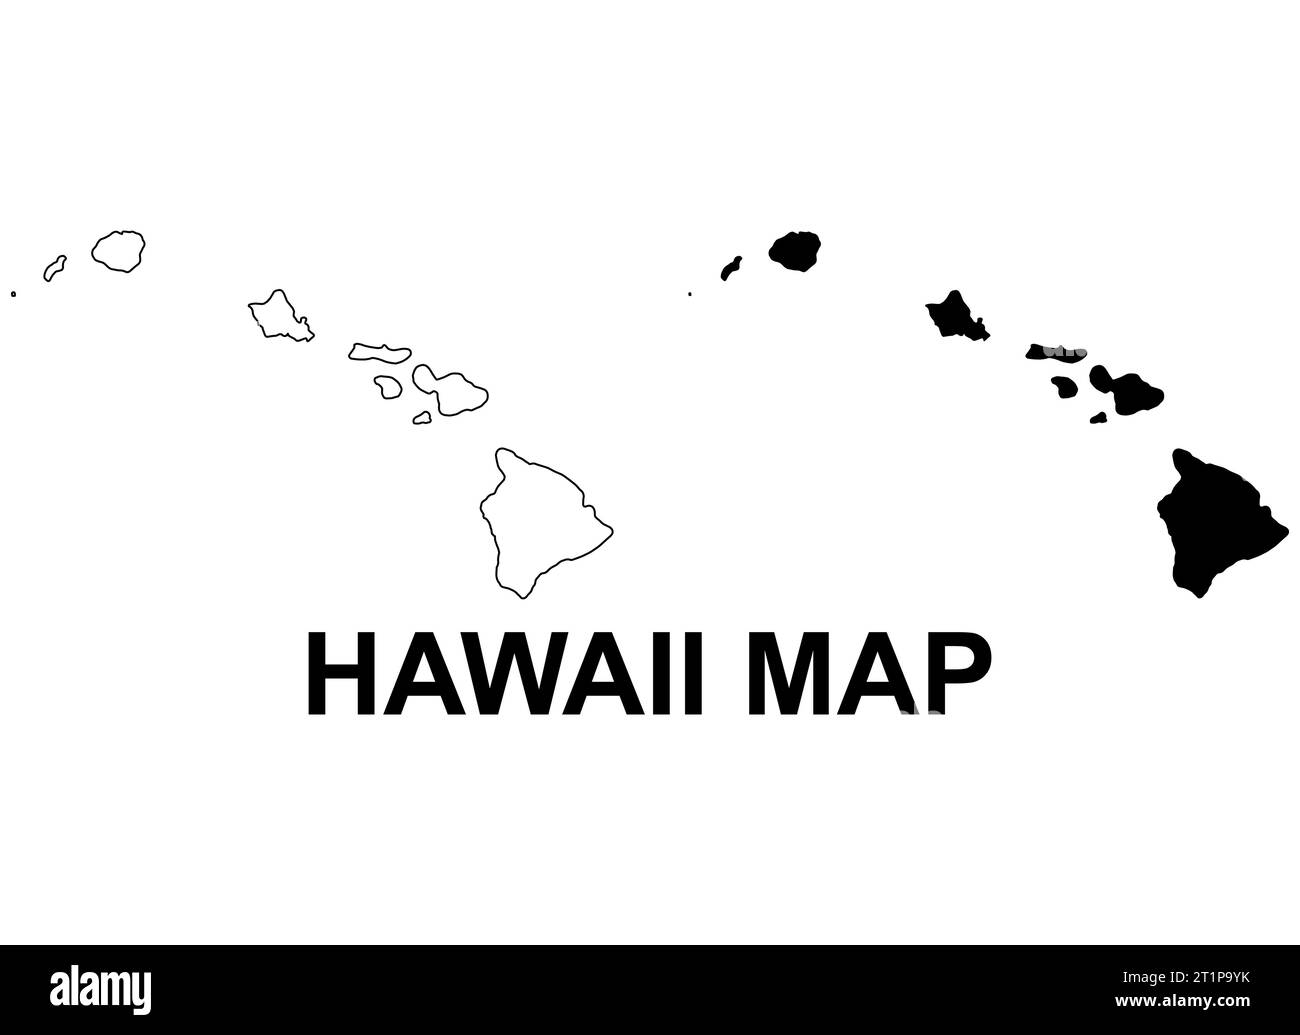 Set of Hawaii map, united states of america. Flat concept icon symbol vector illustration . Stock Vector